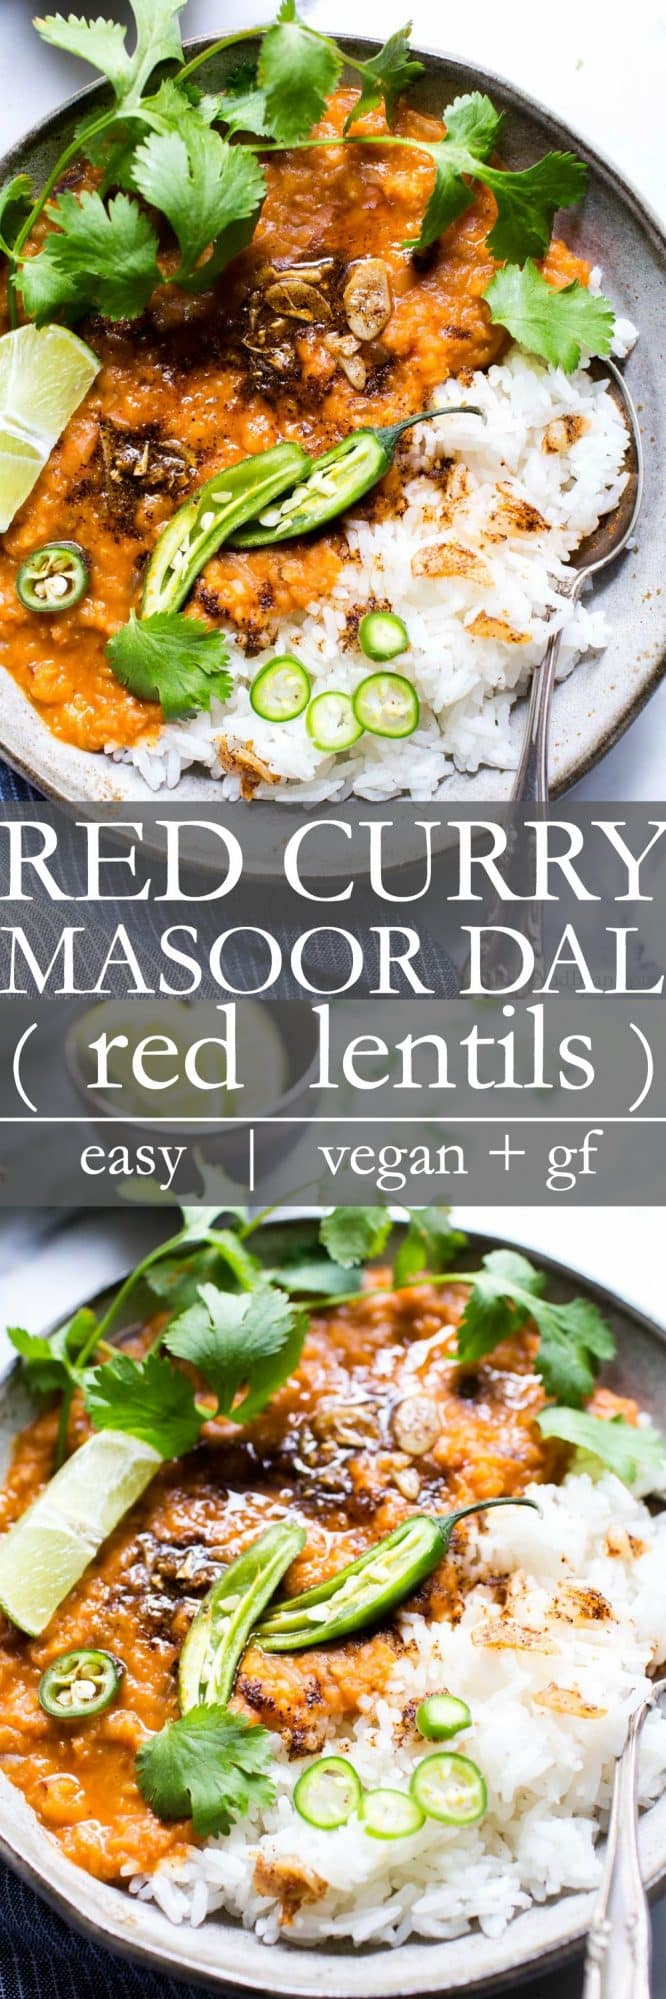 Pinterest pin for red curry masoor dal with two photos: 1 Red curry dal in a bowl with rice and spoon. 2 Red curry dal in a bowl garnished with cilantro and peppers. 